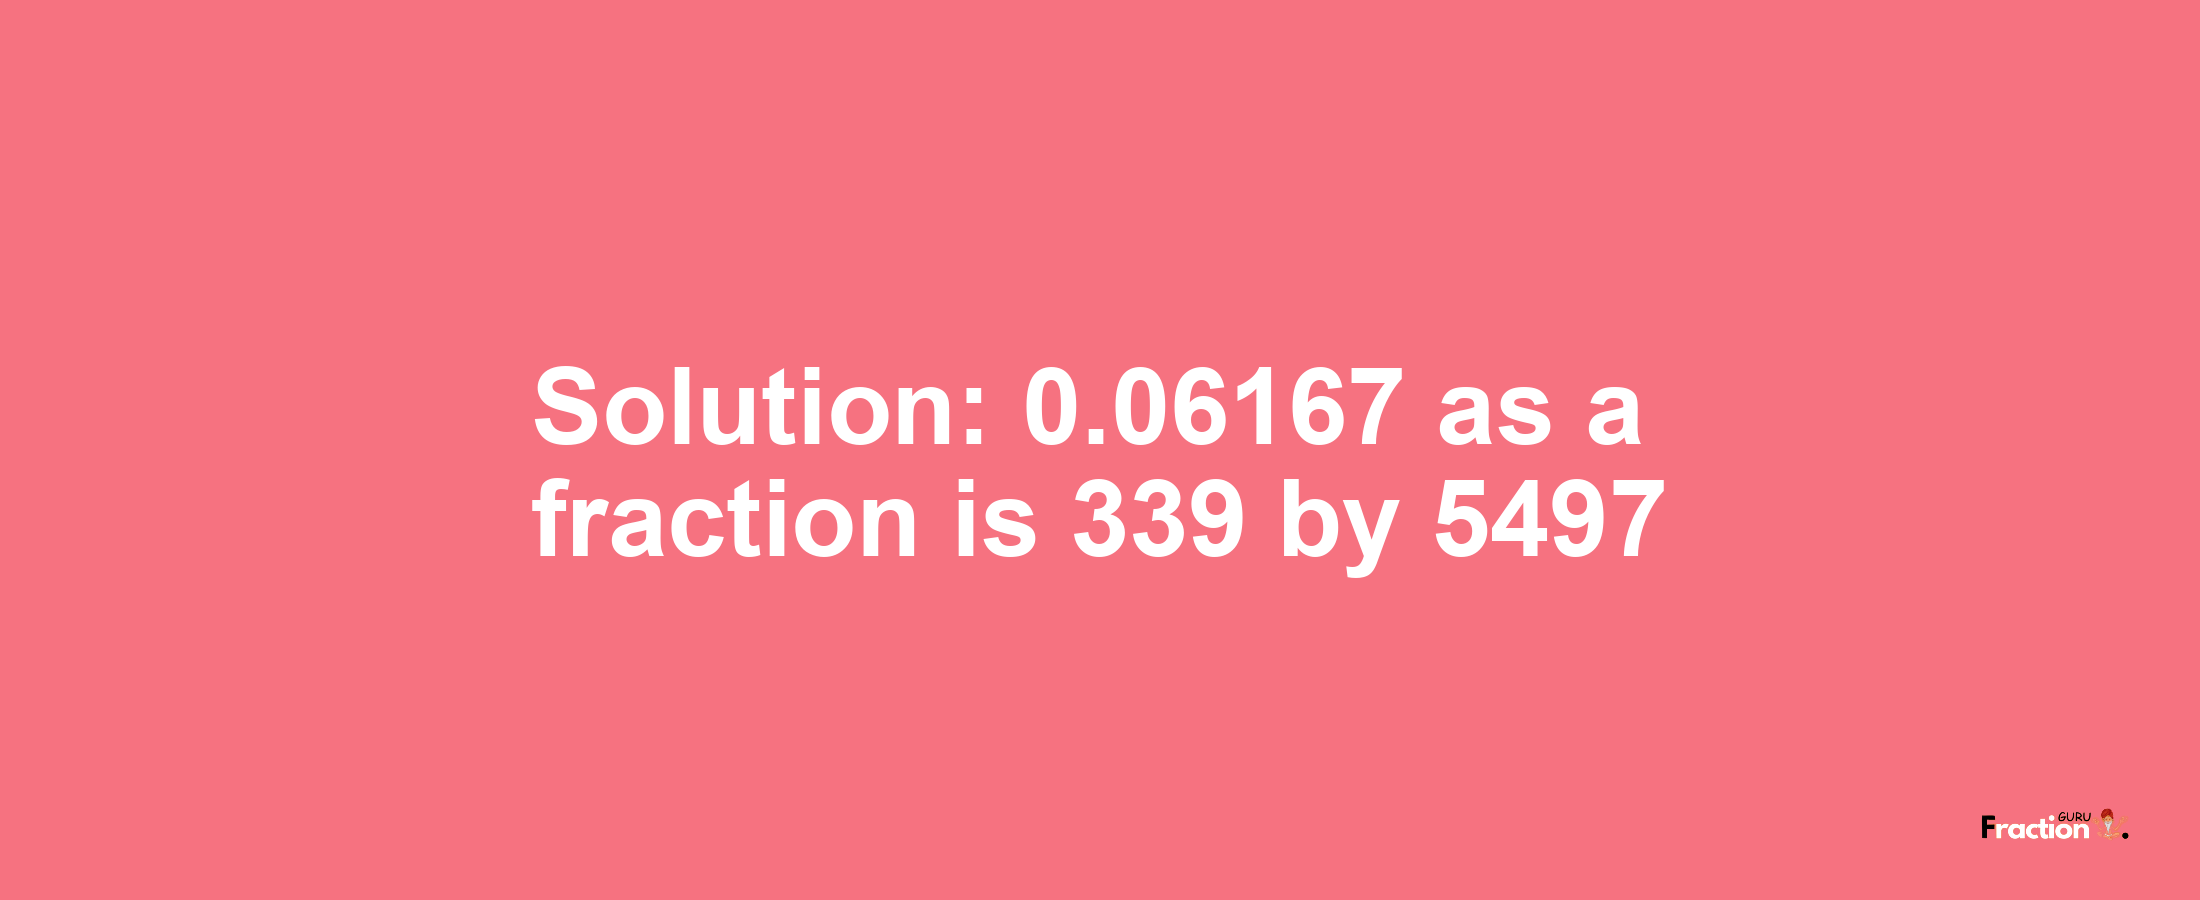 Solution:0.06167 as a fraction is 339/5497